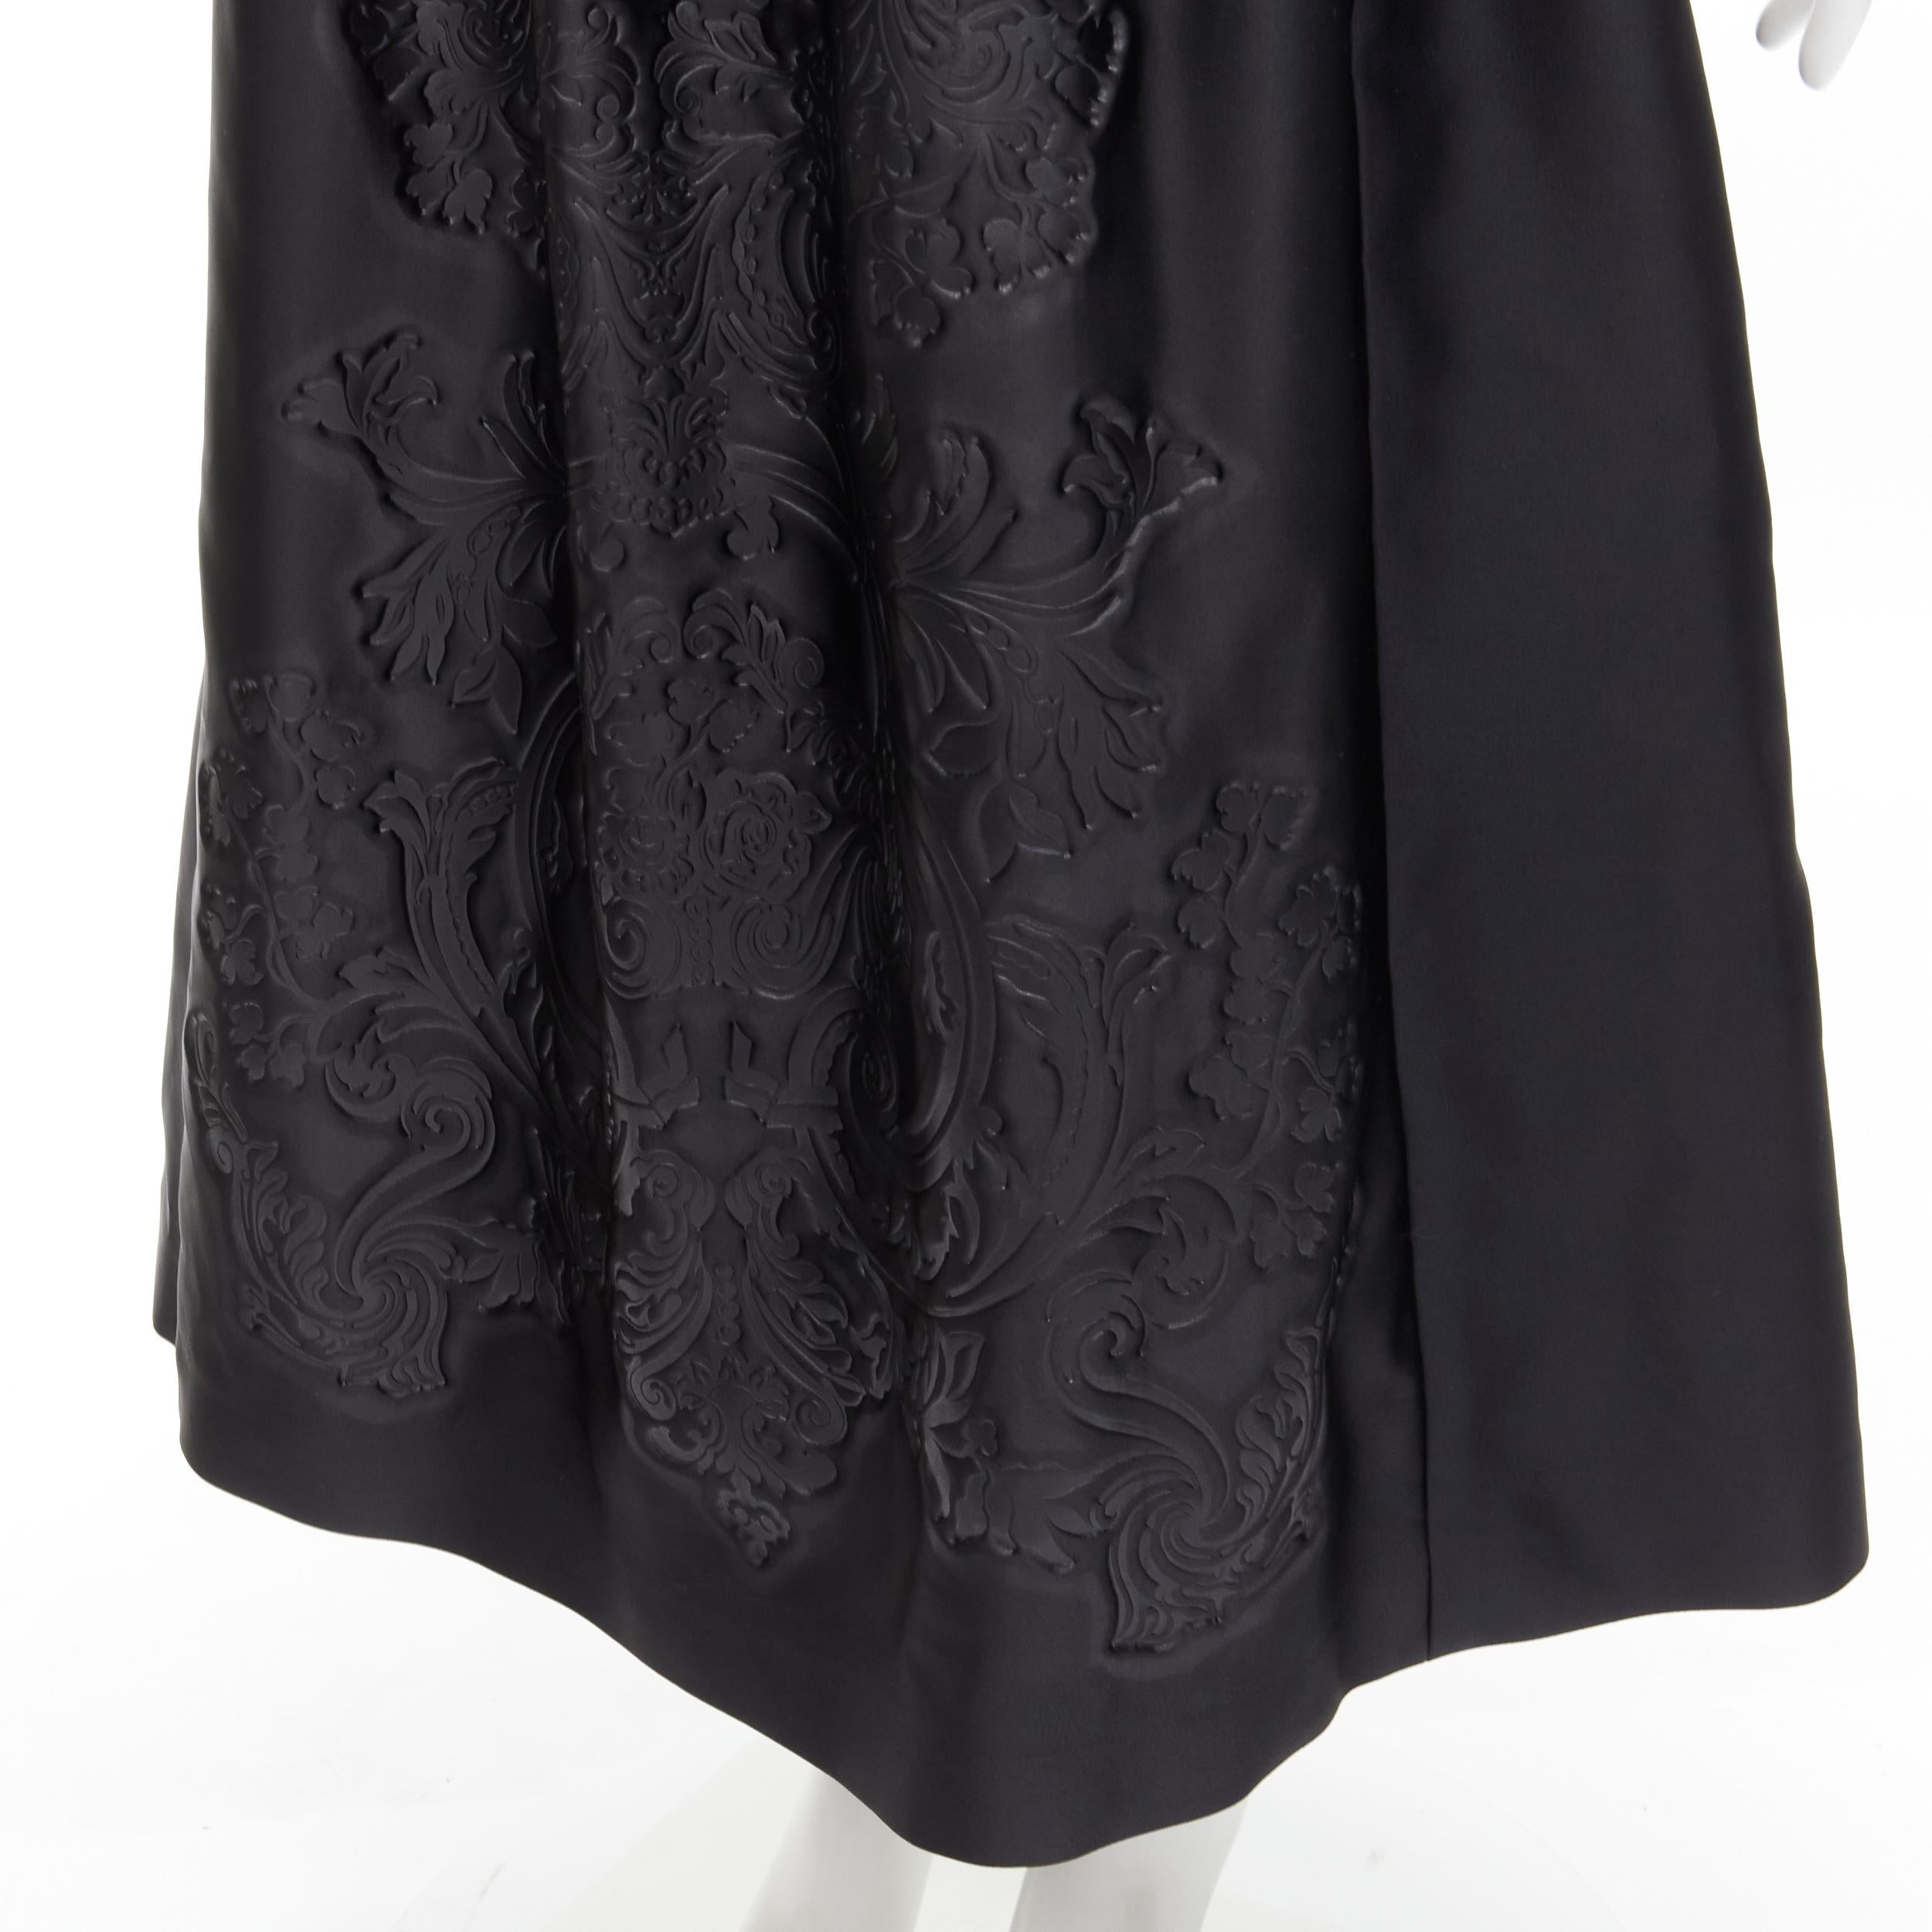 FENDI black duchess satin Barocco embossed press print flared midi skirt IT40 S
Brand: Fendi
Extra Detail: Pressed embossed patter at front. Pleating along waist band to give structure. Side slit pockets. Zip back closure.

CONDITION:
Condition: